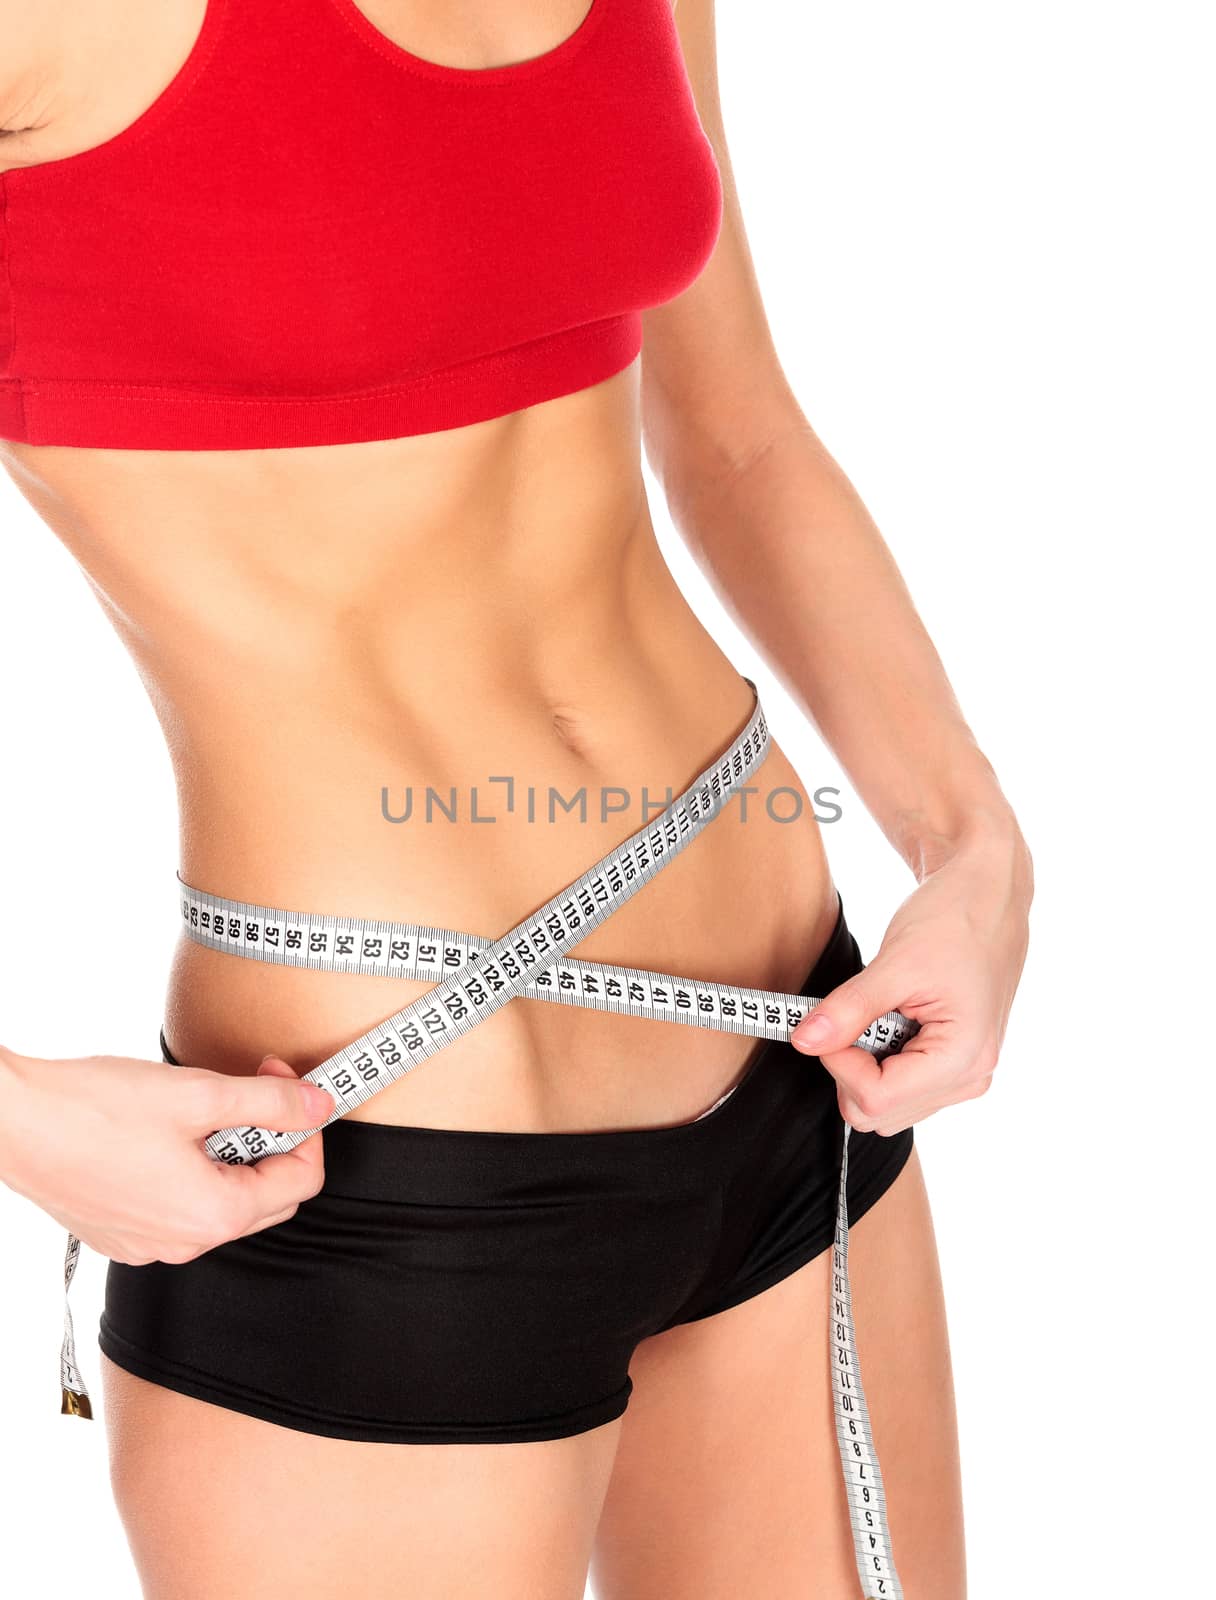 Slim woman measures her waistline, isolated on a white background